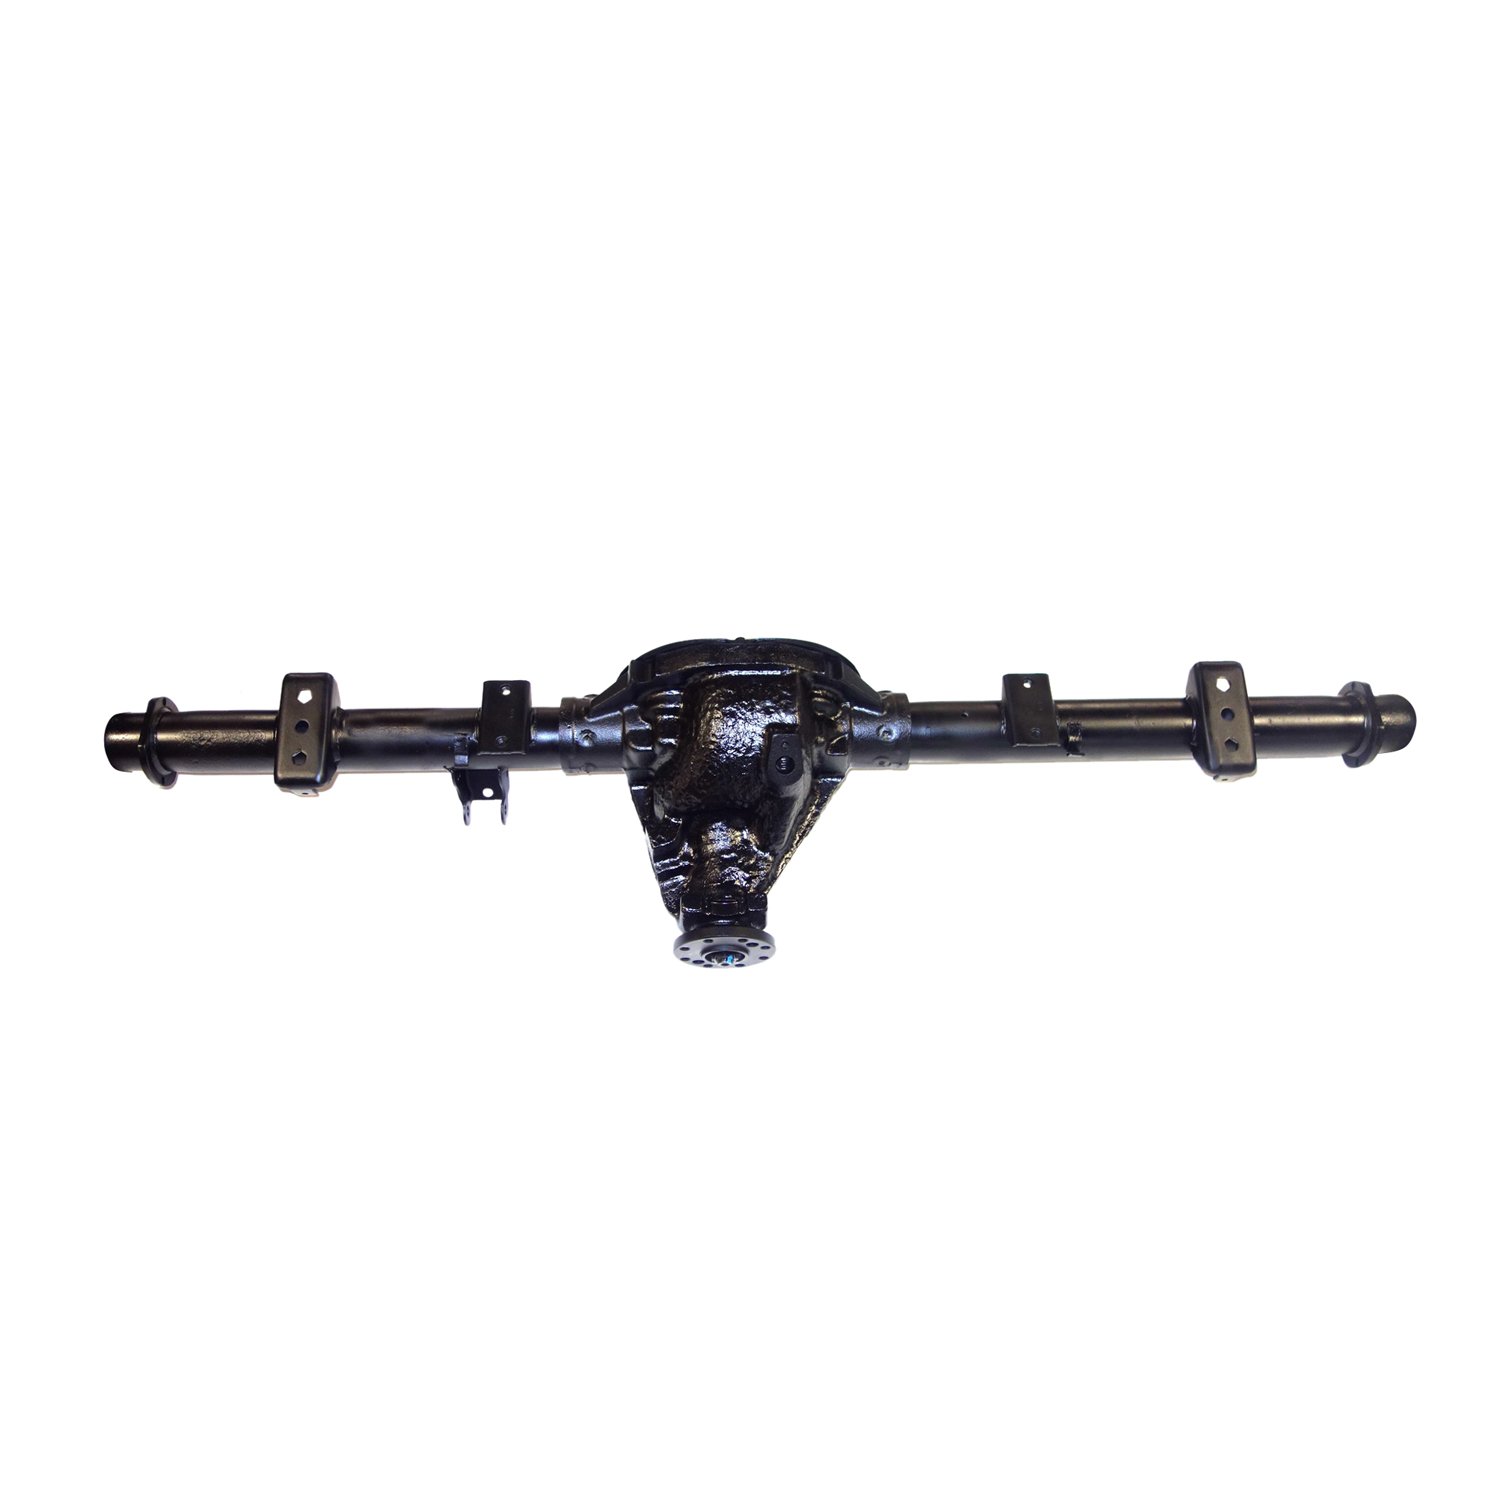 Remanufactured Axle Assy Chy 8.25" 04-05 Durango 3.55 , 4x4 w/o Traction Control, Posi